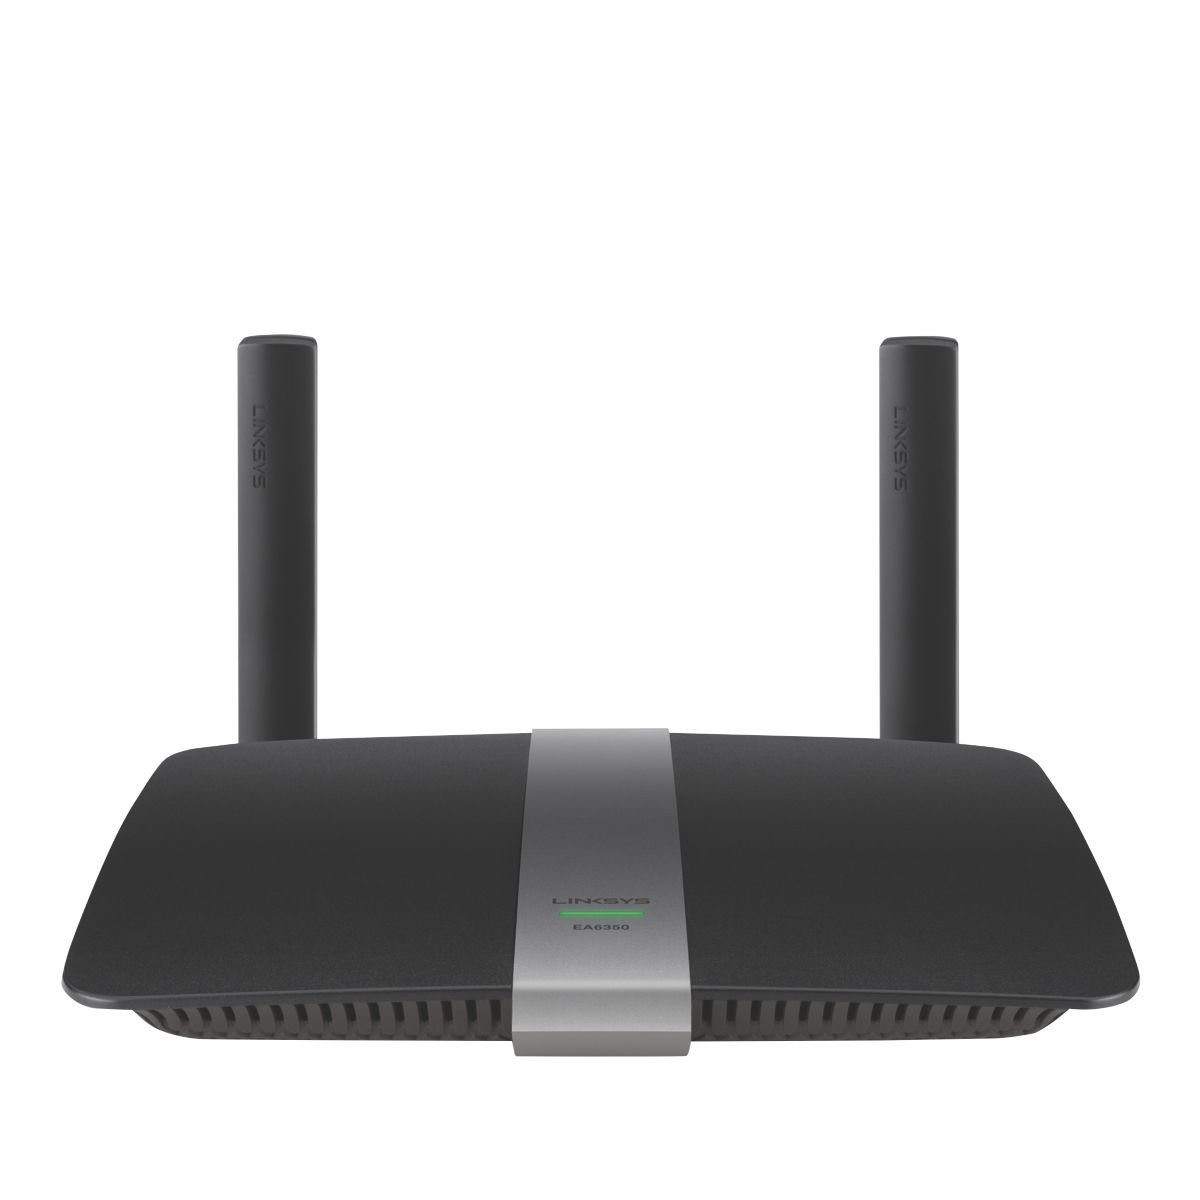 Linksys AC1200 WLAN Cable Router